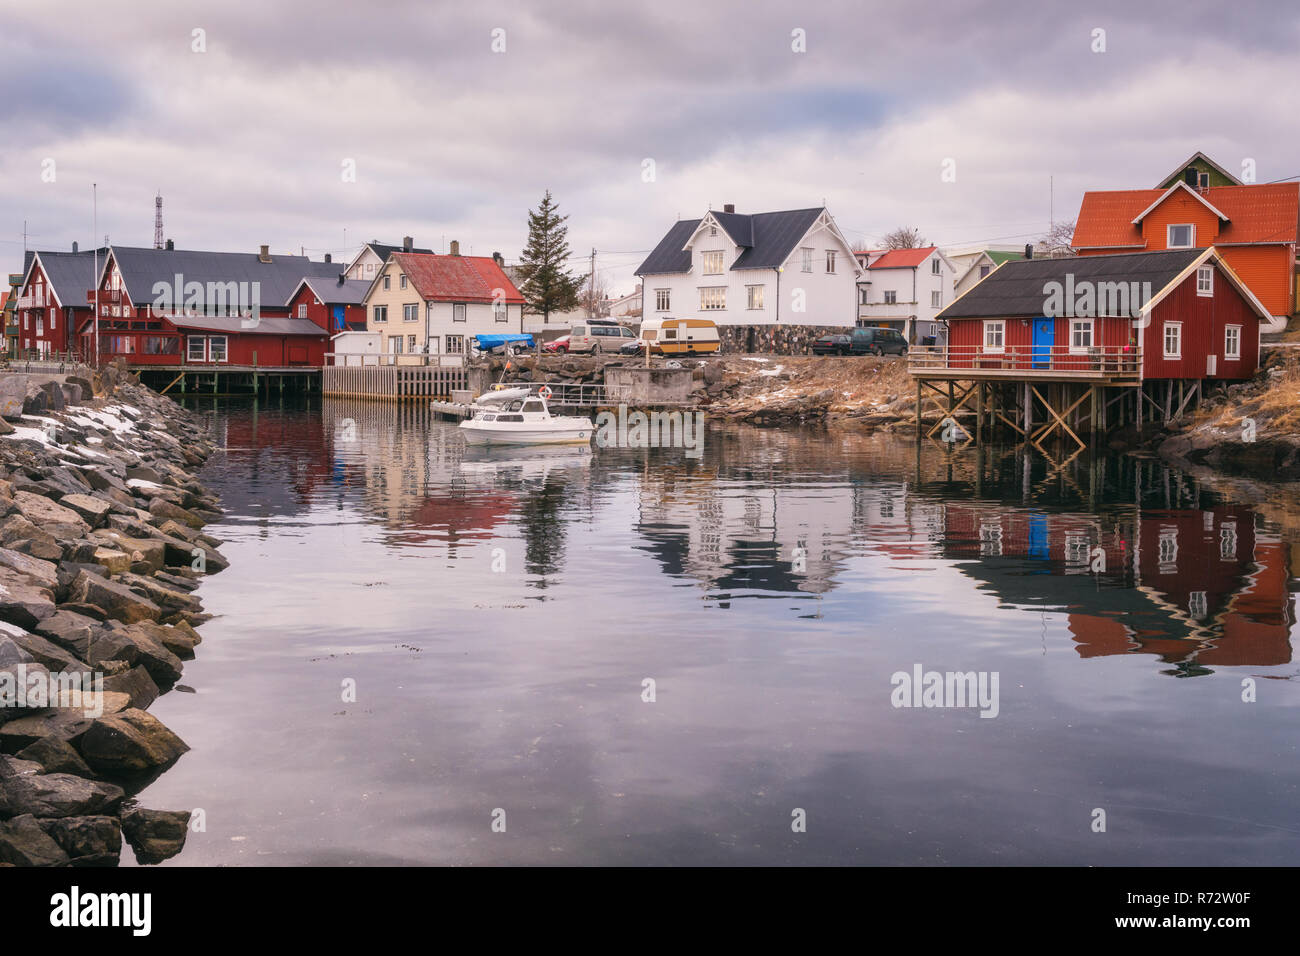 Cozy small fishing village Henningsvaer in Lofoten Islands, Northern  Norway. Rural seaside landscape with traditional rorbuer (rorbu Stock Photo  - Alamy